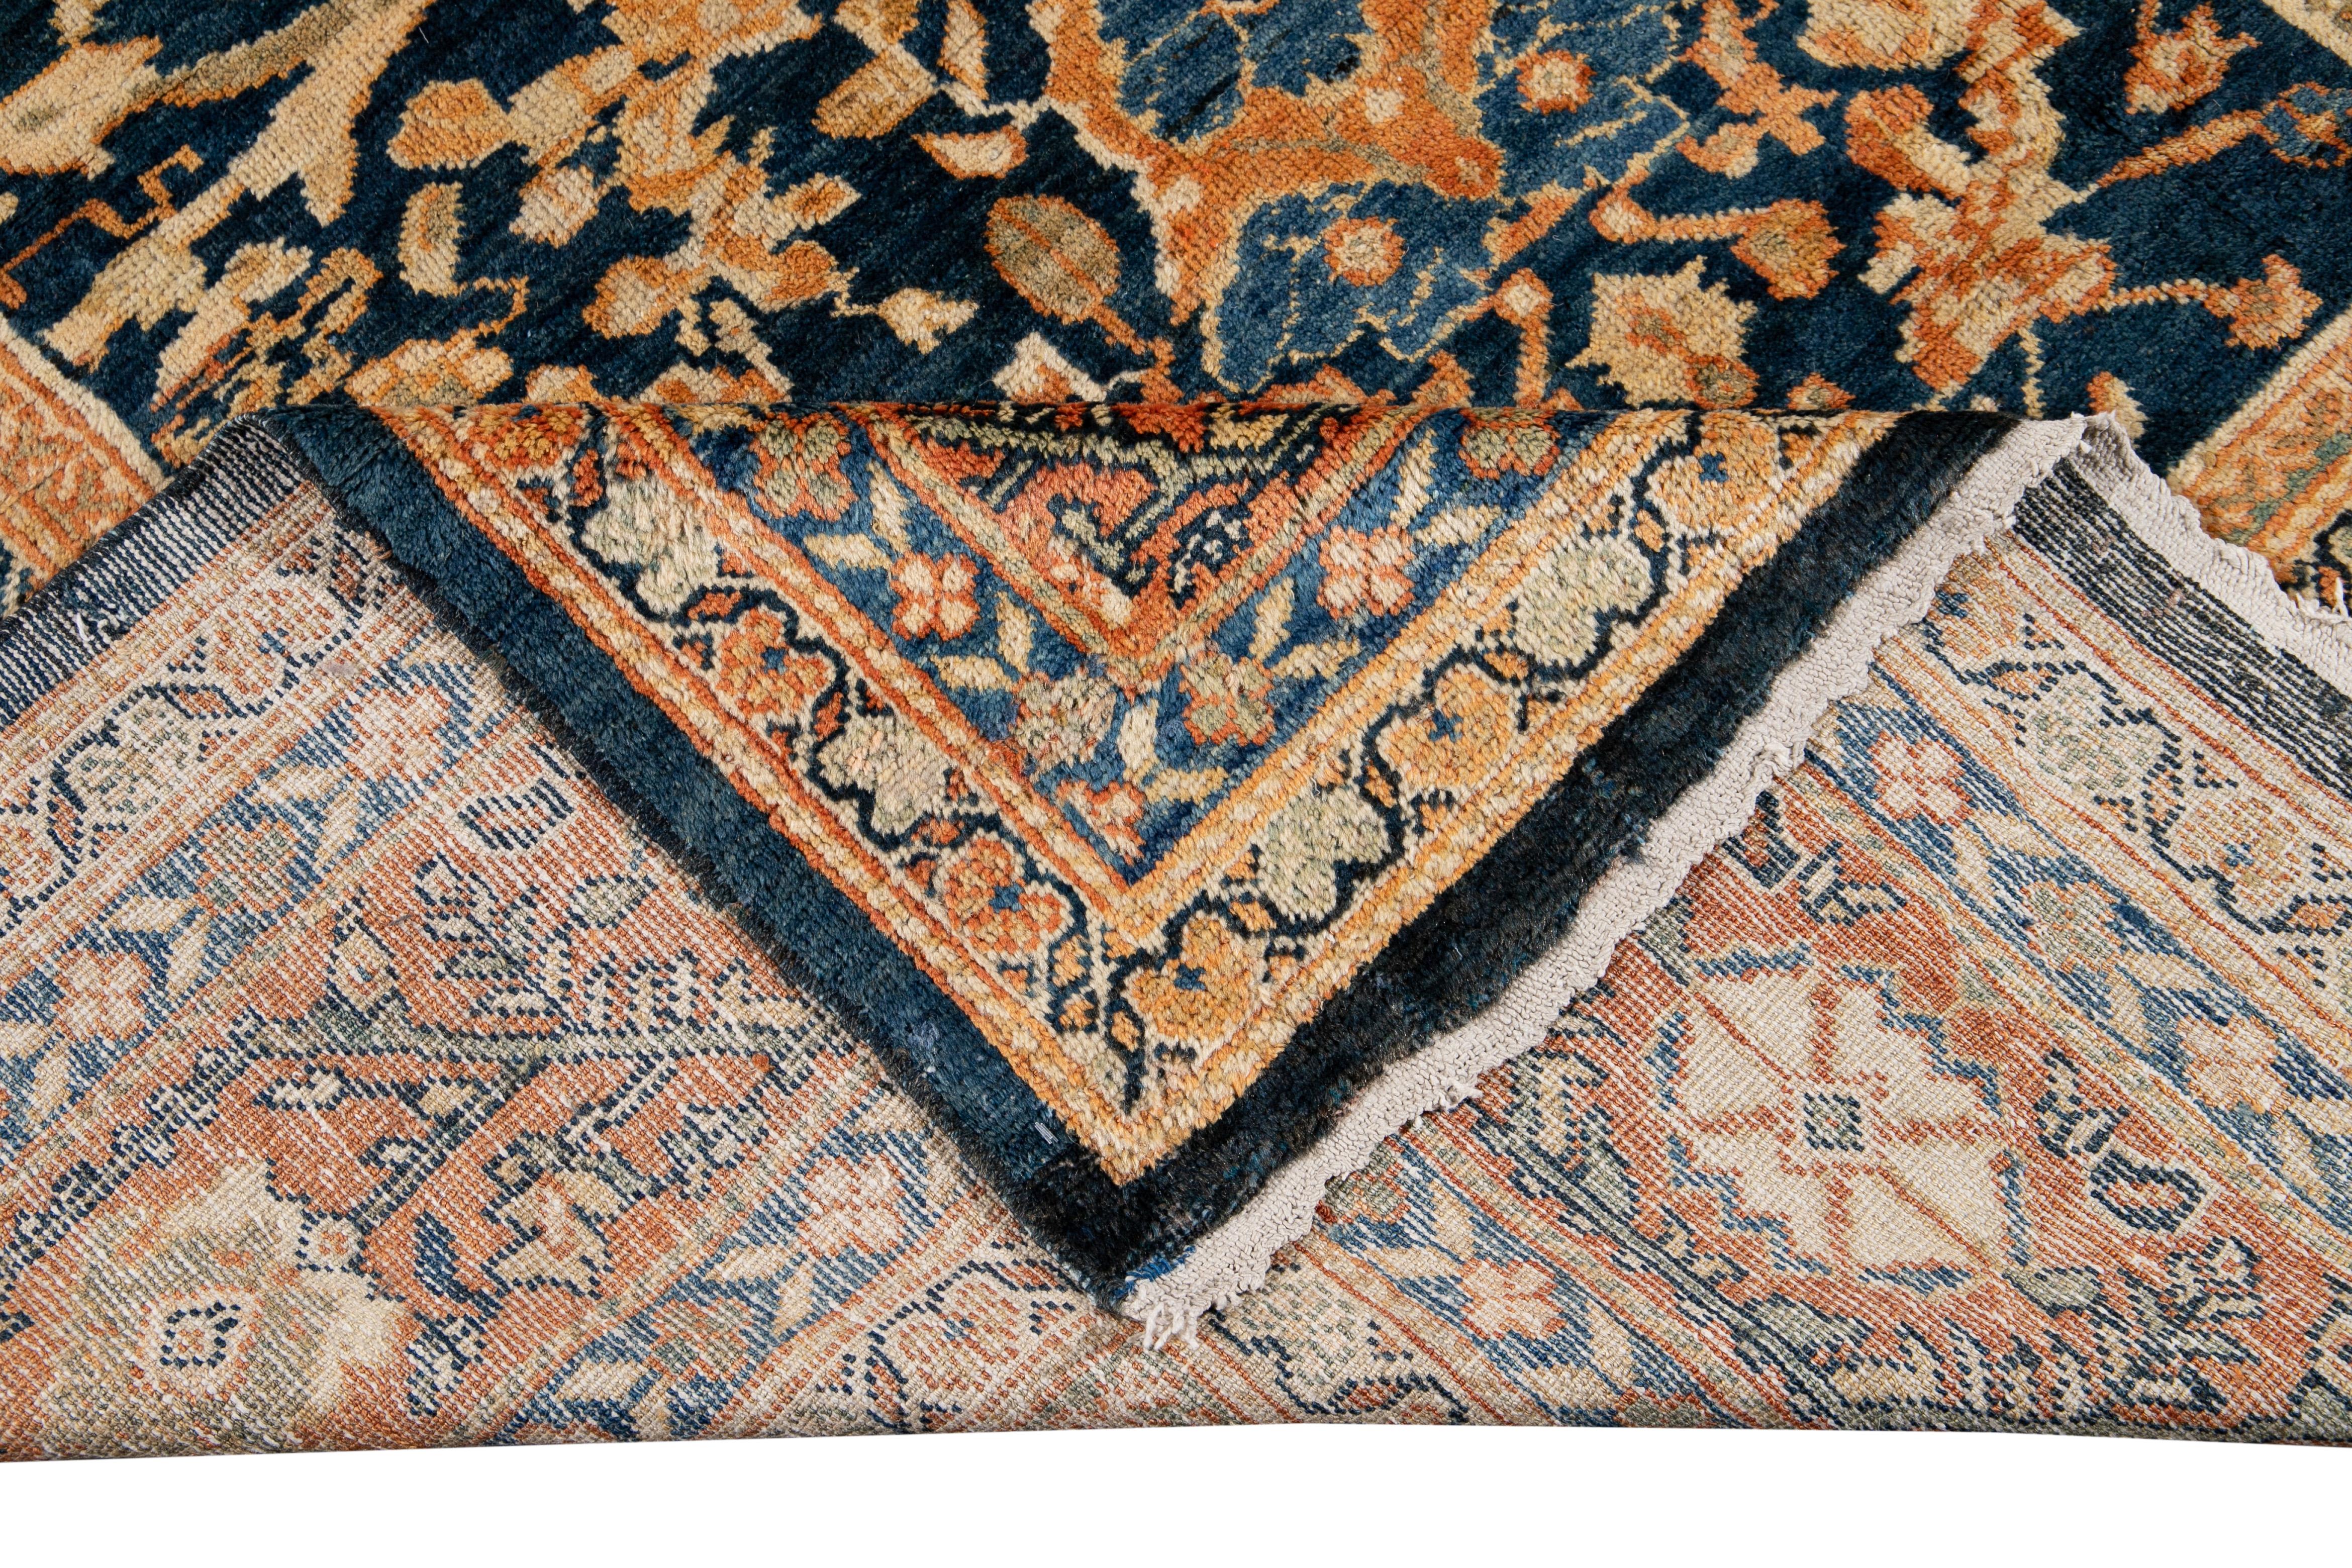 Beautiful hand-knotted antique Mahal wool rug with the navy blue field. This Persian rug has an orange-peach frame and beige and brown accents featuring an allover floral pattern design.

This rug measure: 12'5